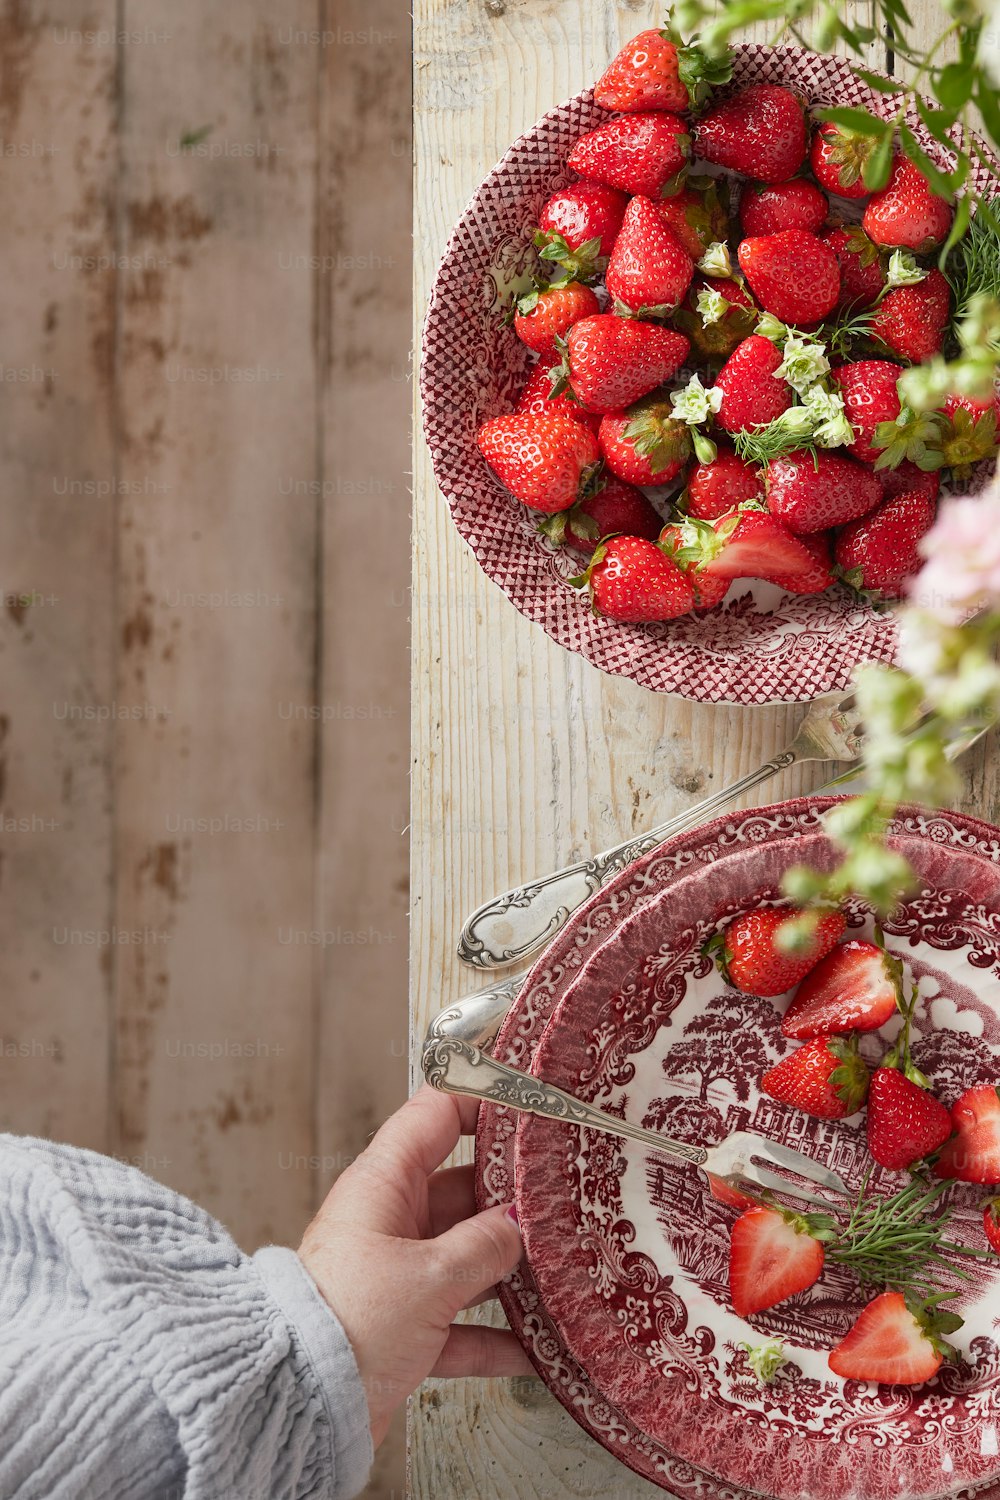 a plate of strawberries with a bowl of strawberries in the background